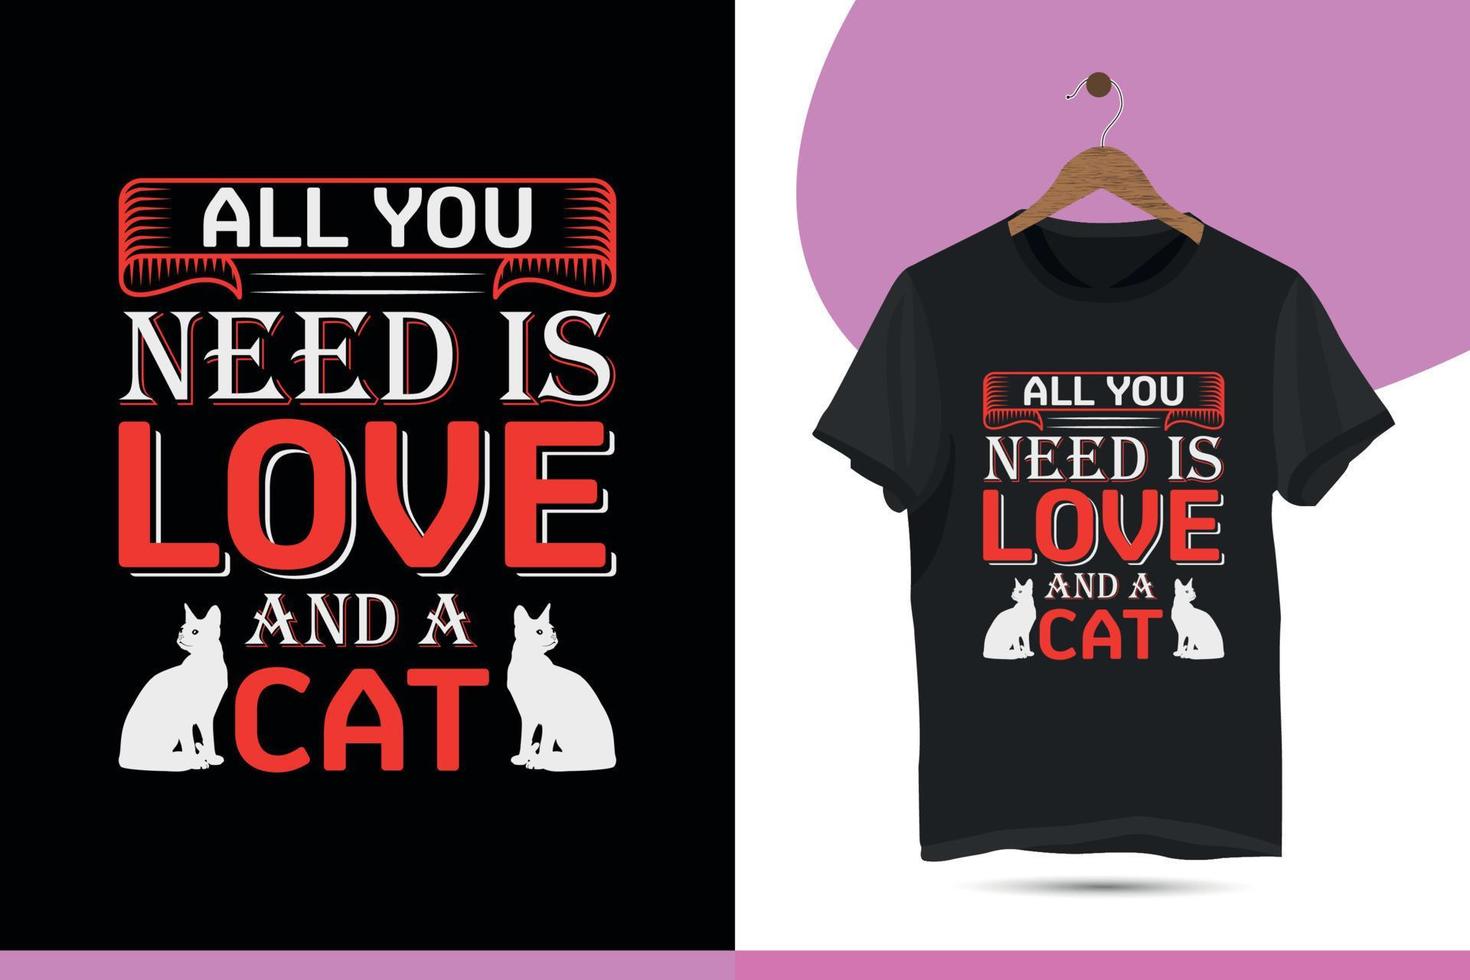 All you need is love and a cat - Happy valentine's day typography cat t-shirt design template for couples. Vector illustration with a cat silhouette and unique colorful design.